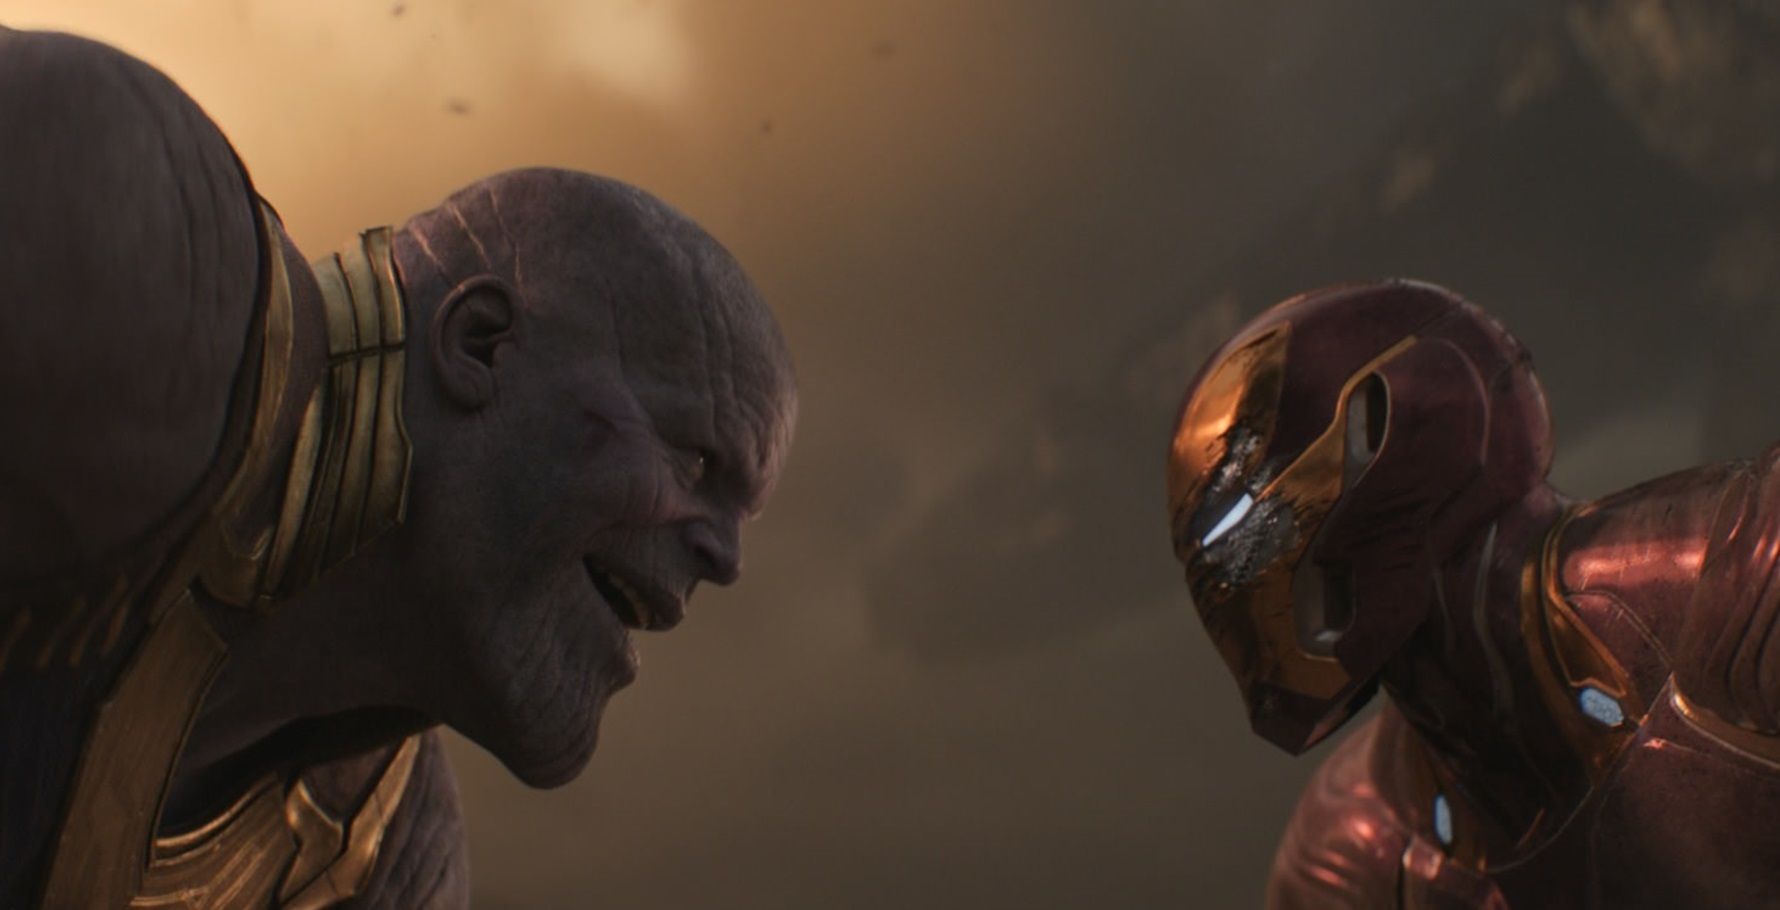 Avengers Endgame 5 Ways Iron Mans Ending Is Fitting And 5 Why It Makes